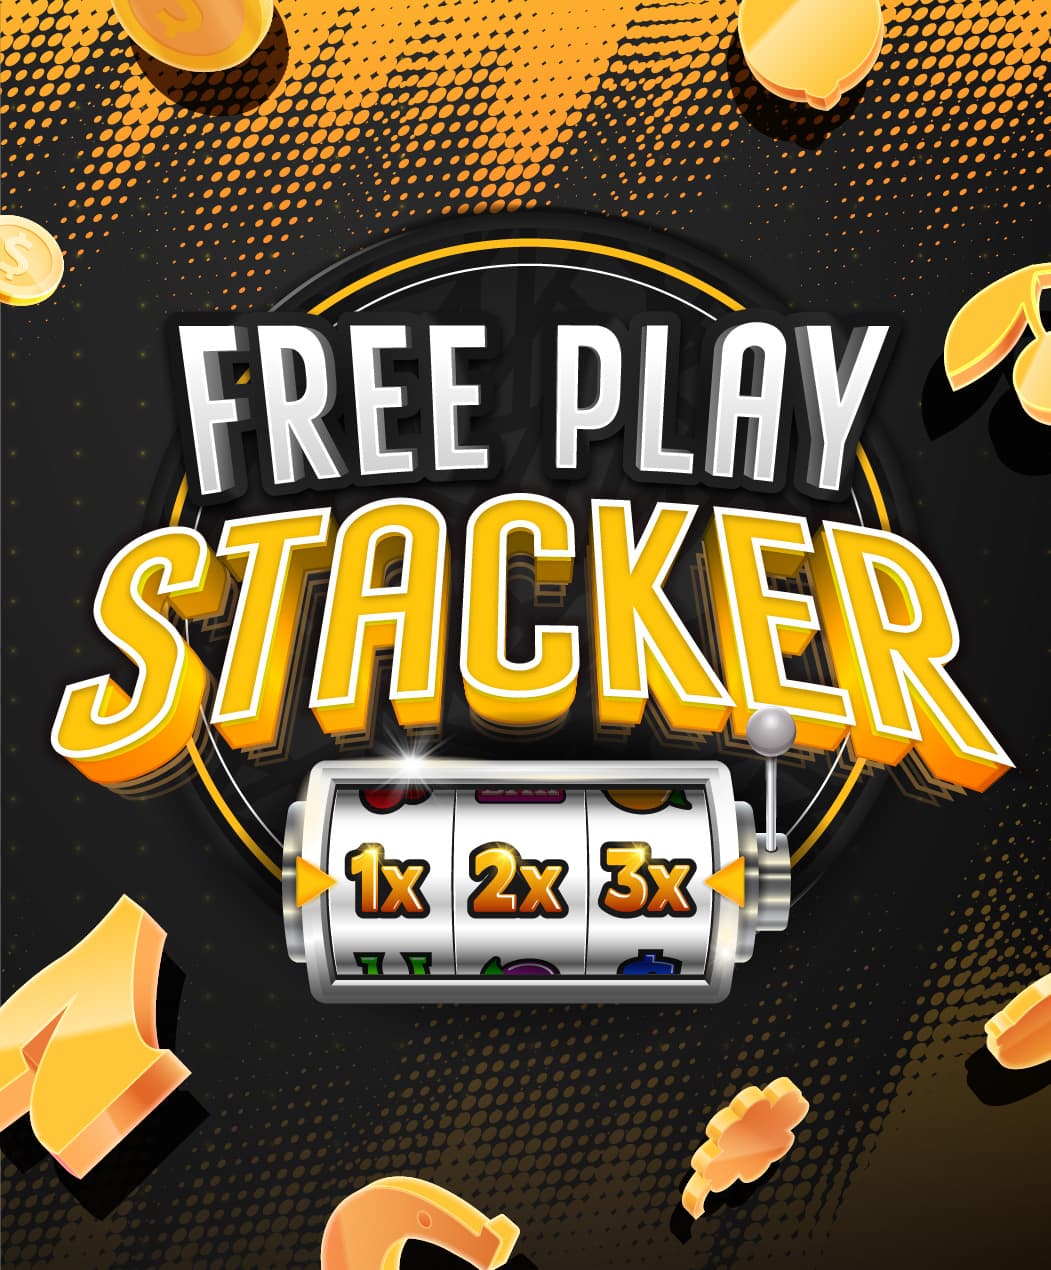 Free Play Stacker